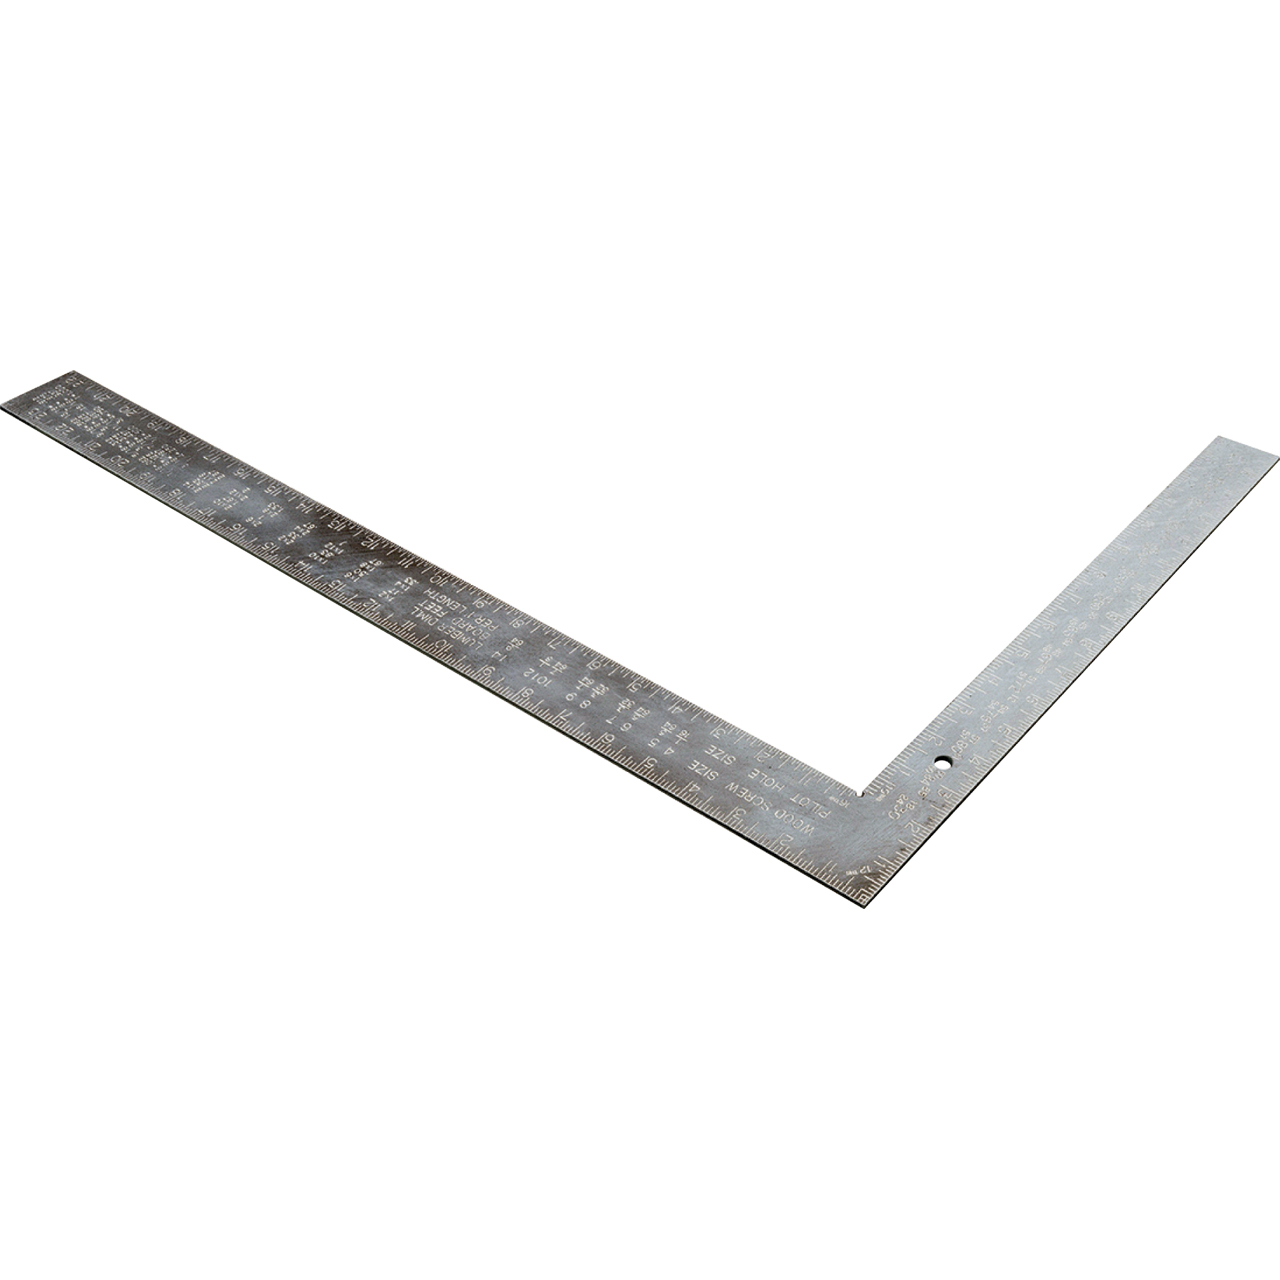 Framing square metal yard stick in a 2 foot level. 1a - Lil Dusty